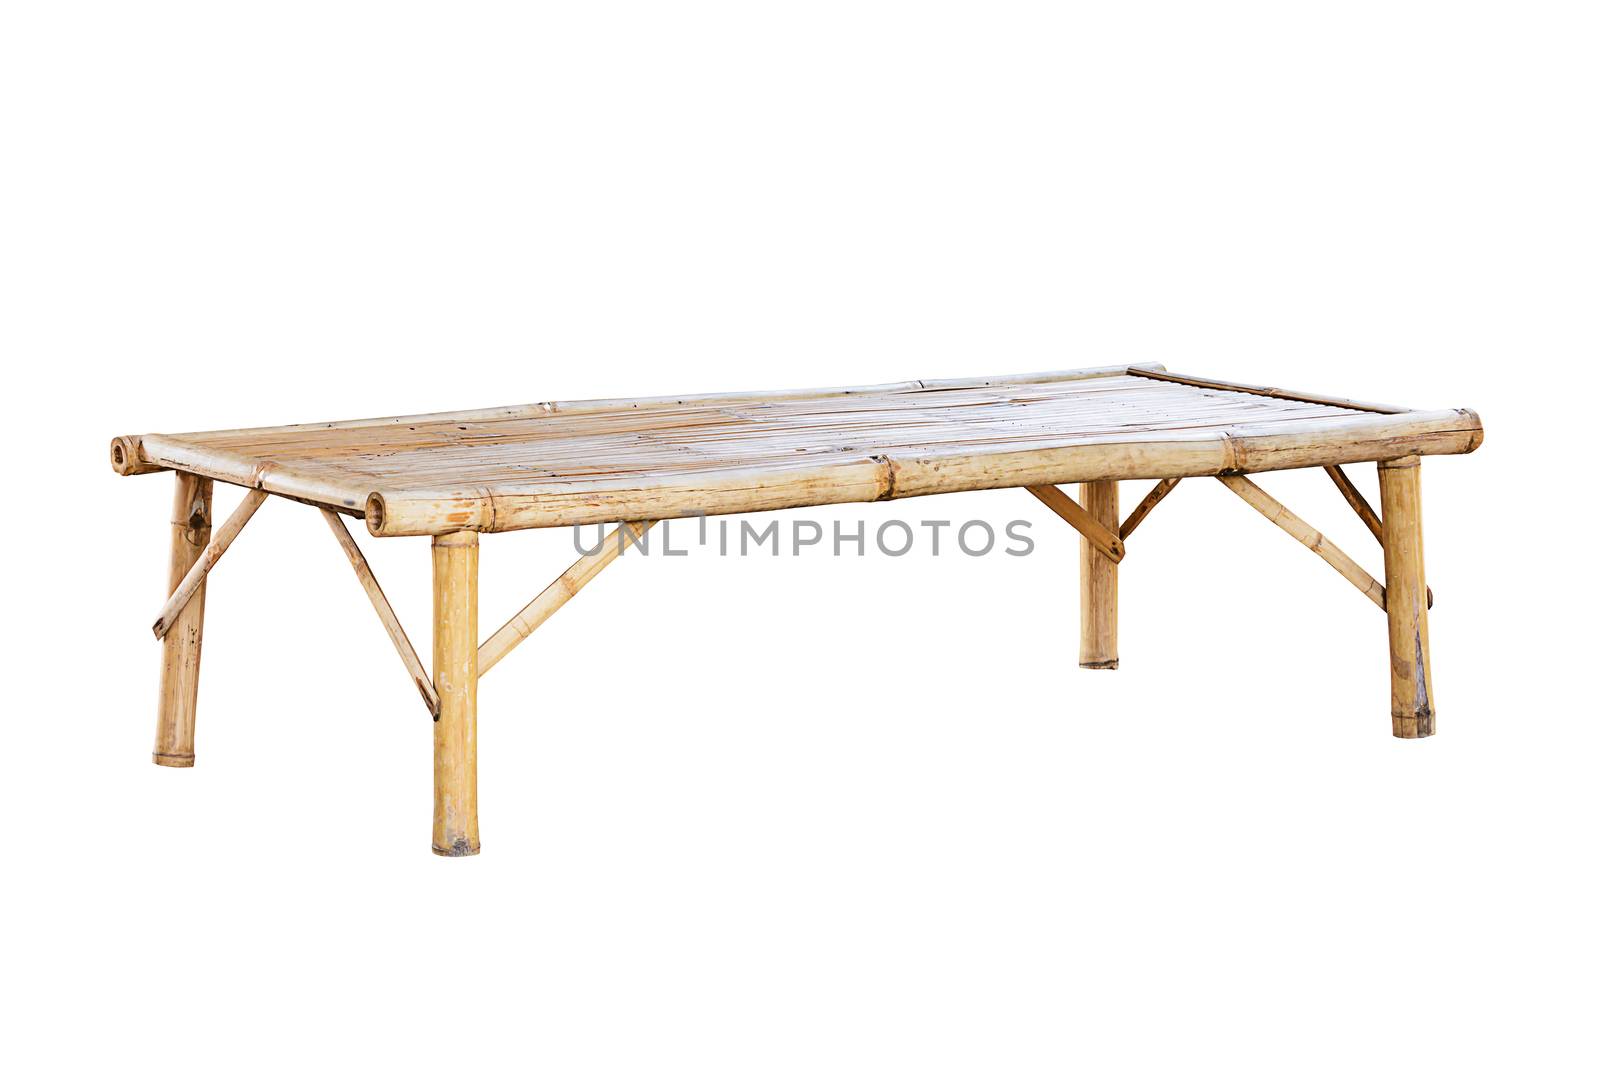 Bamboo bench isolated on white background with clipping path
